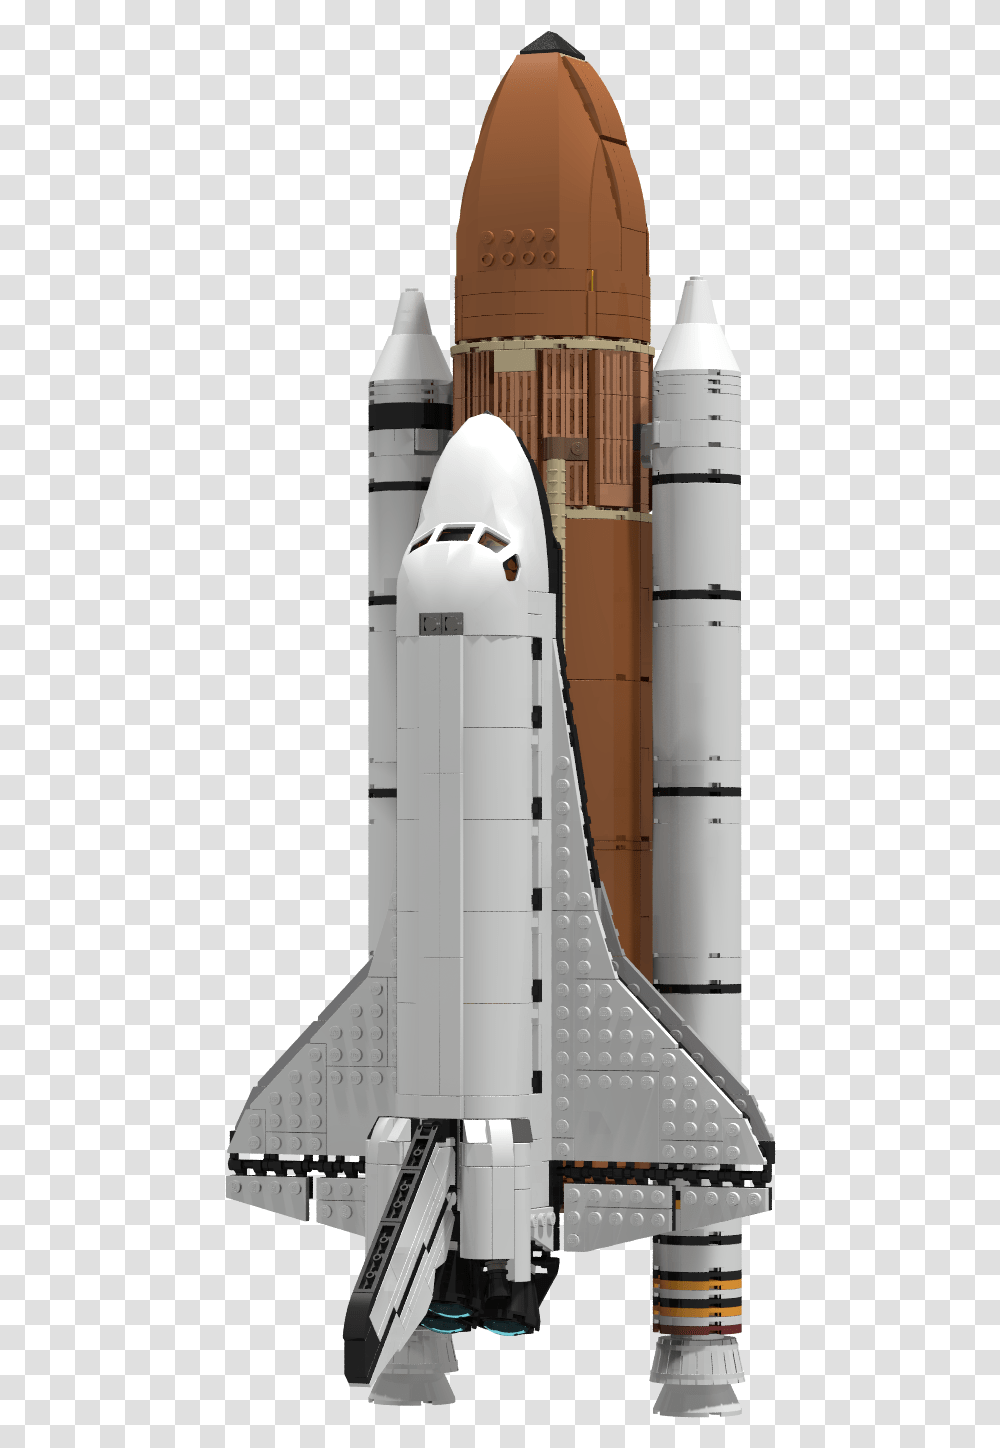 Space Shuttle Rocket Download Space Shuttle Real Rocket, Spaceship, Aircraft, Vehicle Transparent Png